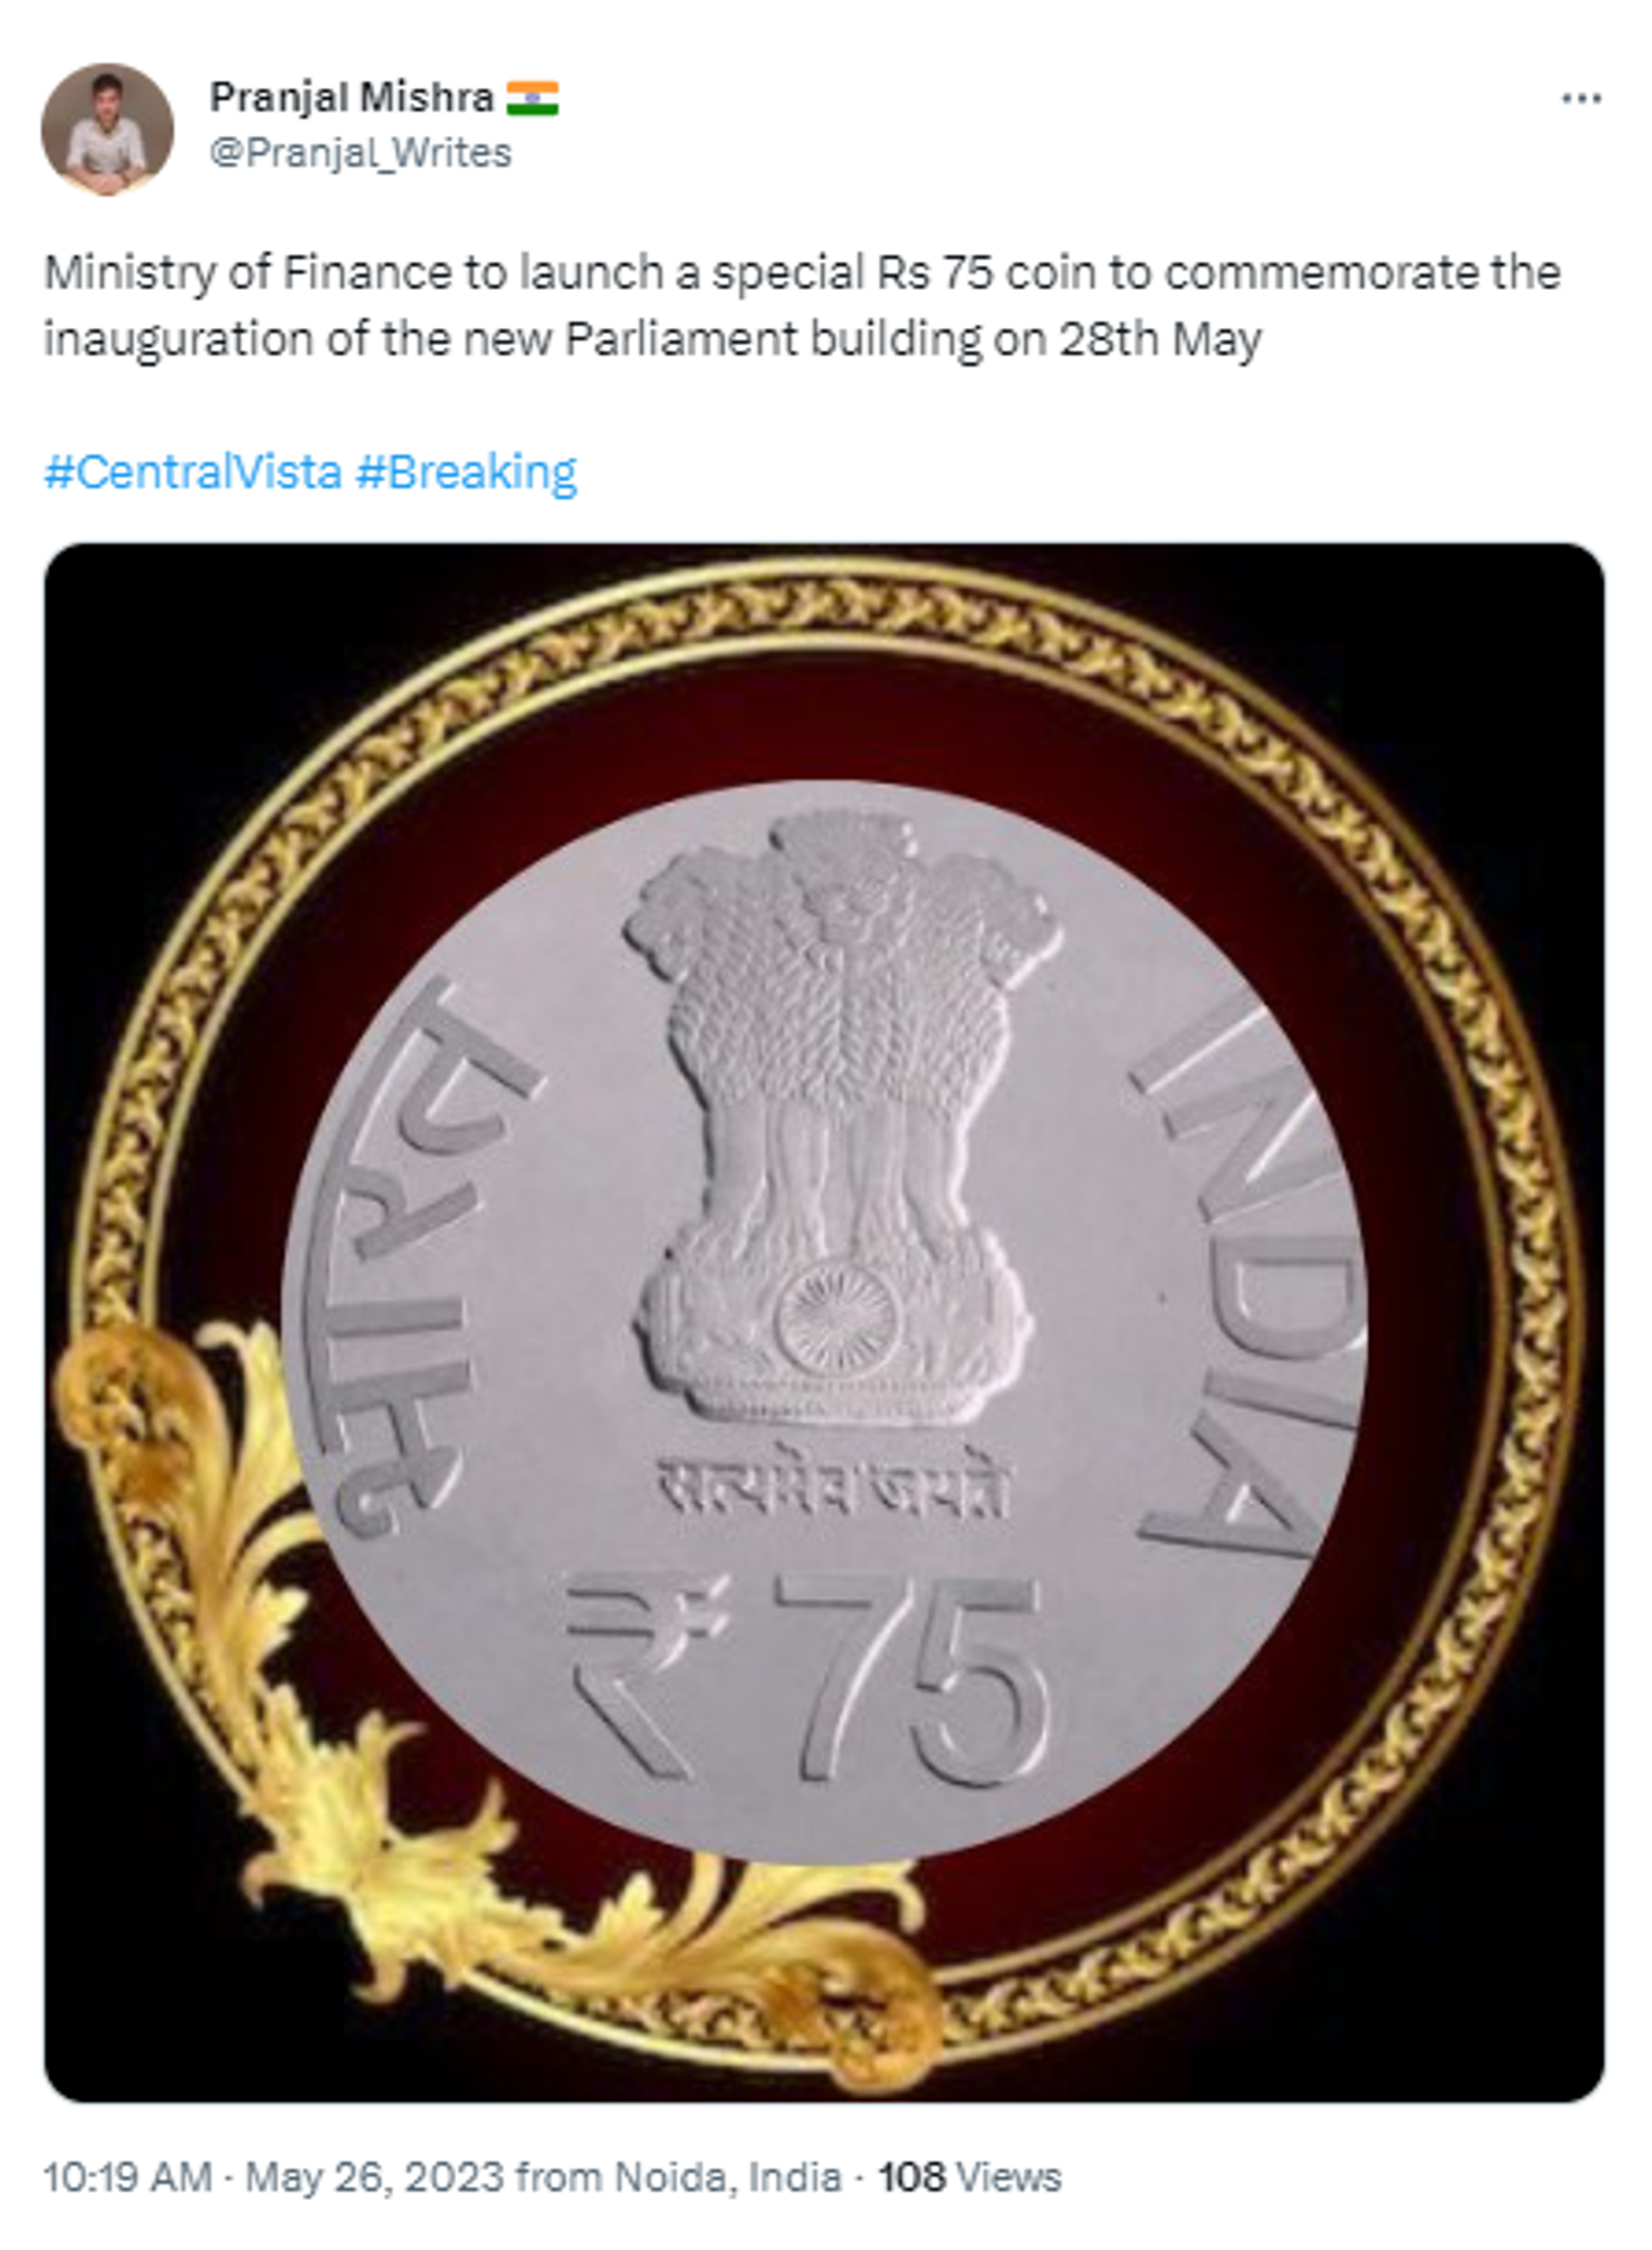 Special 75 rupees coin to be launched to mark new parliament building's opening by Prime Minister Narendra Modi - Sputnik India, 1920, 26.05.2023